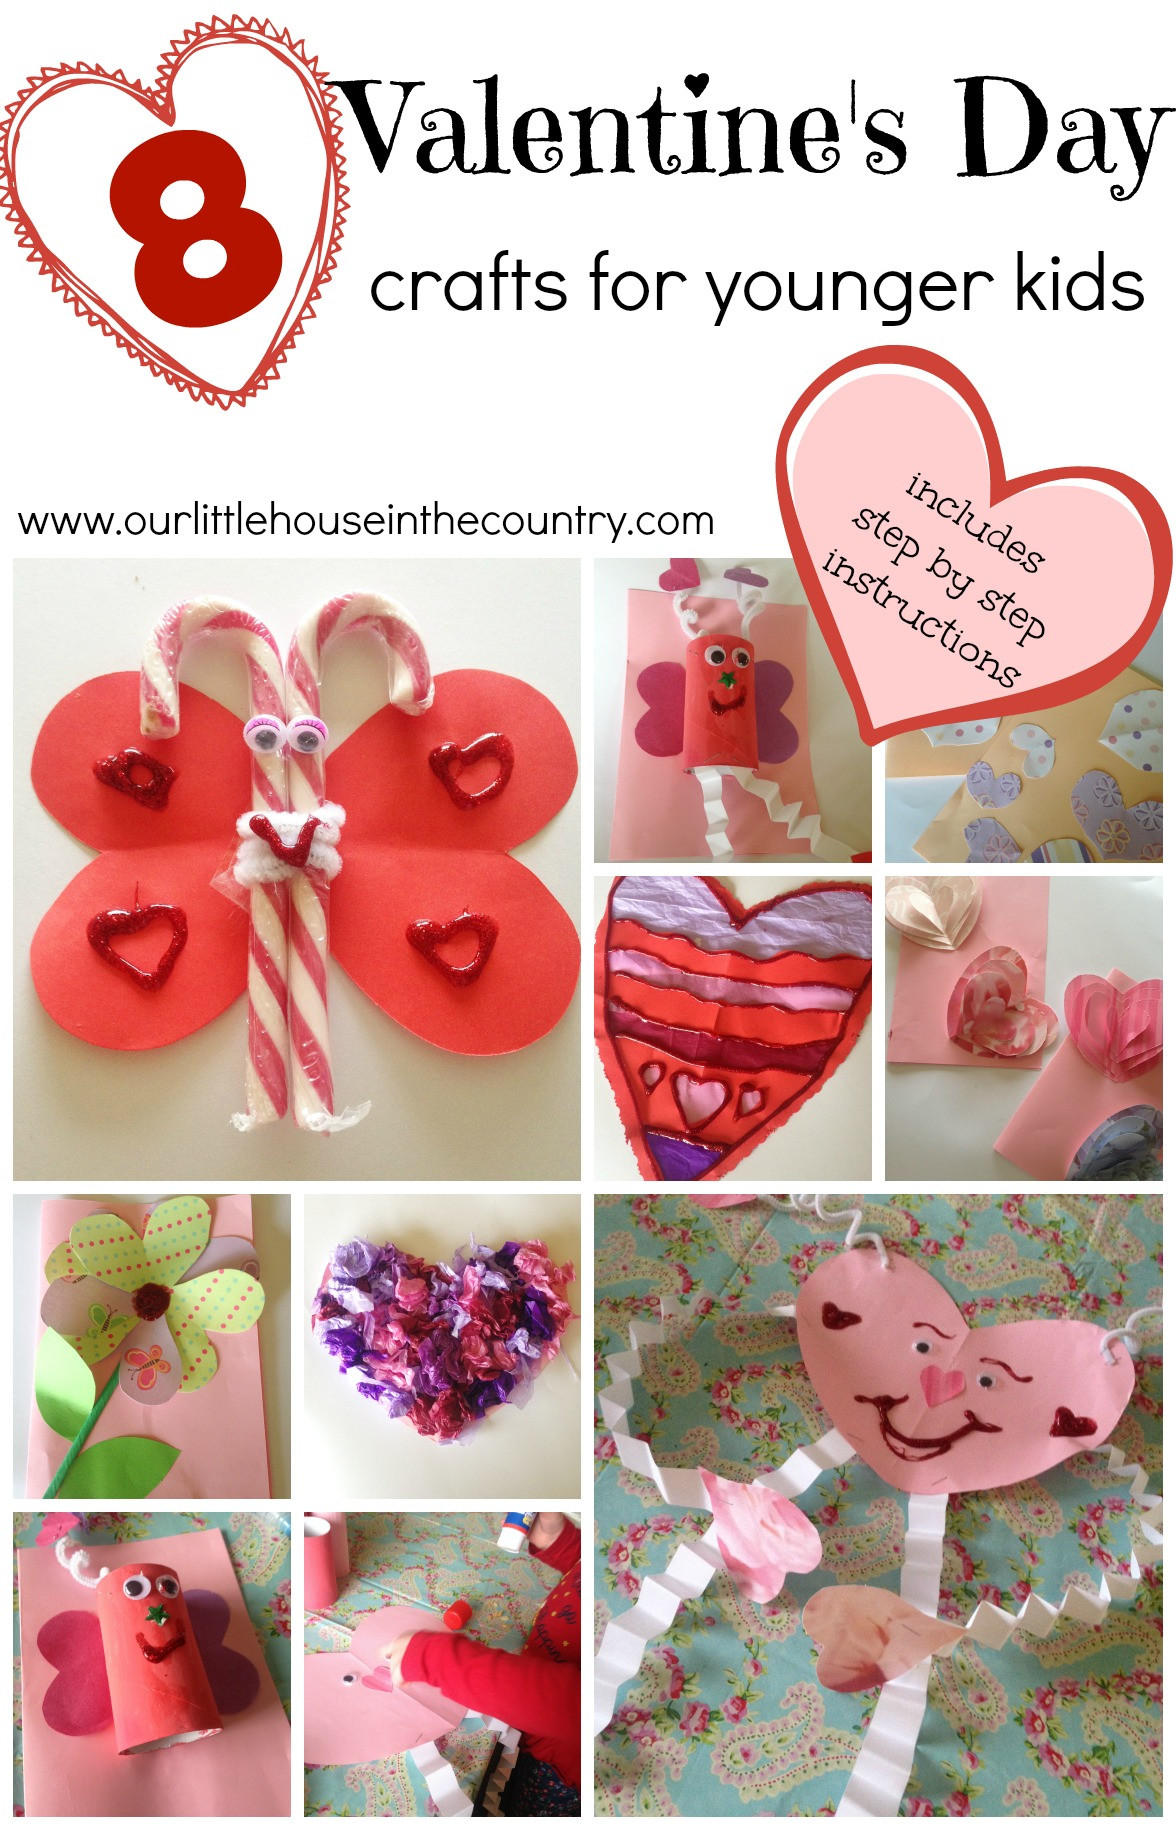 Valentines Craft Ideas For Preschoolers
 Valentine’s Day Crafts for Younger Children Preschool and